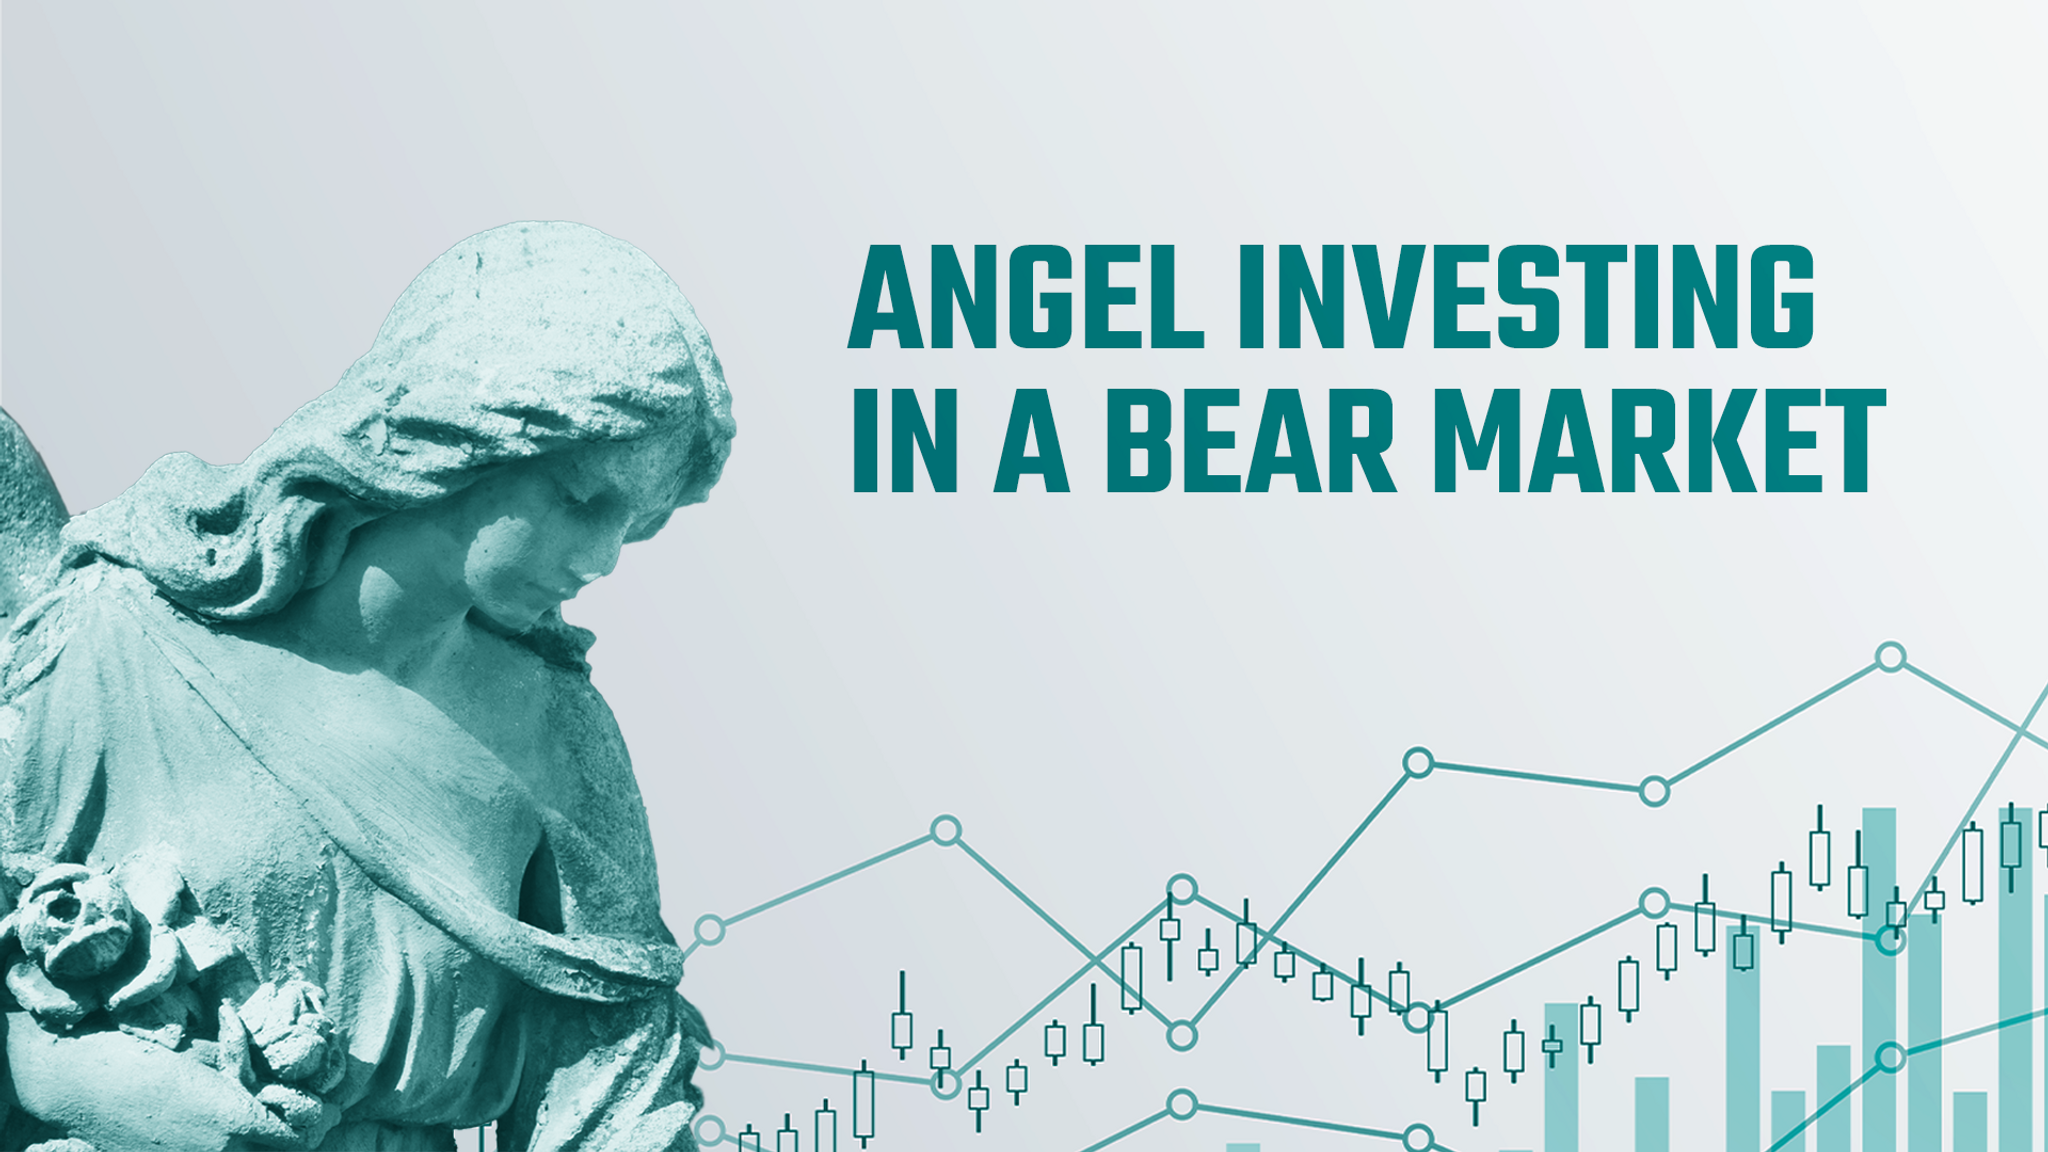 Angel Investing in a Bear Market